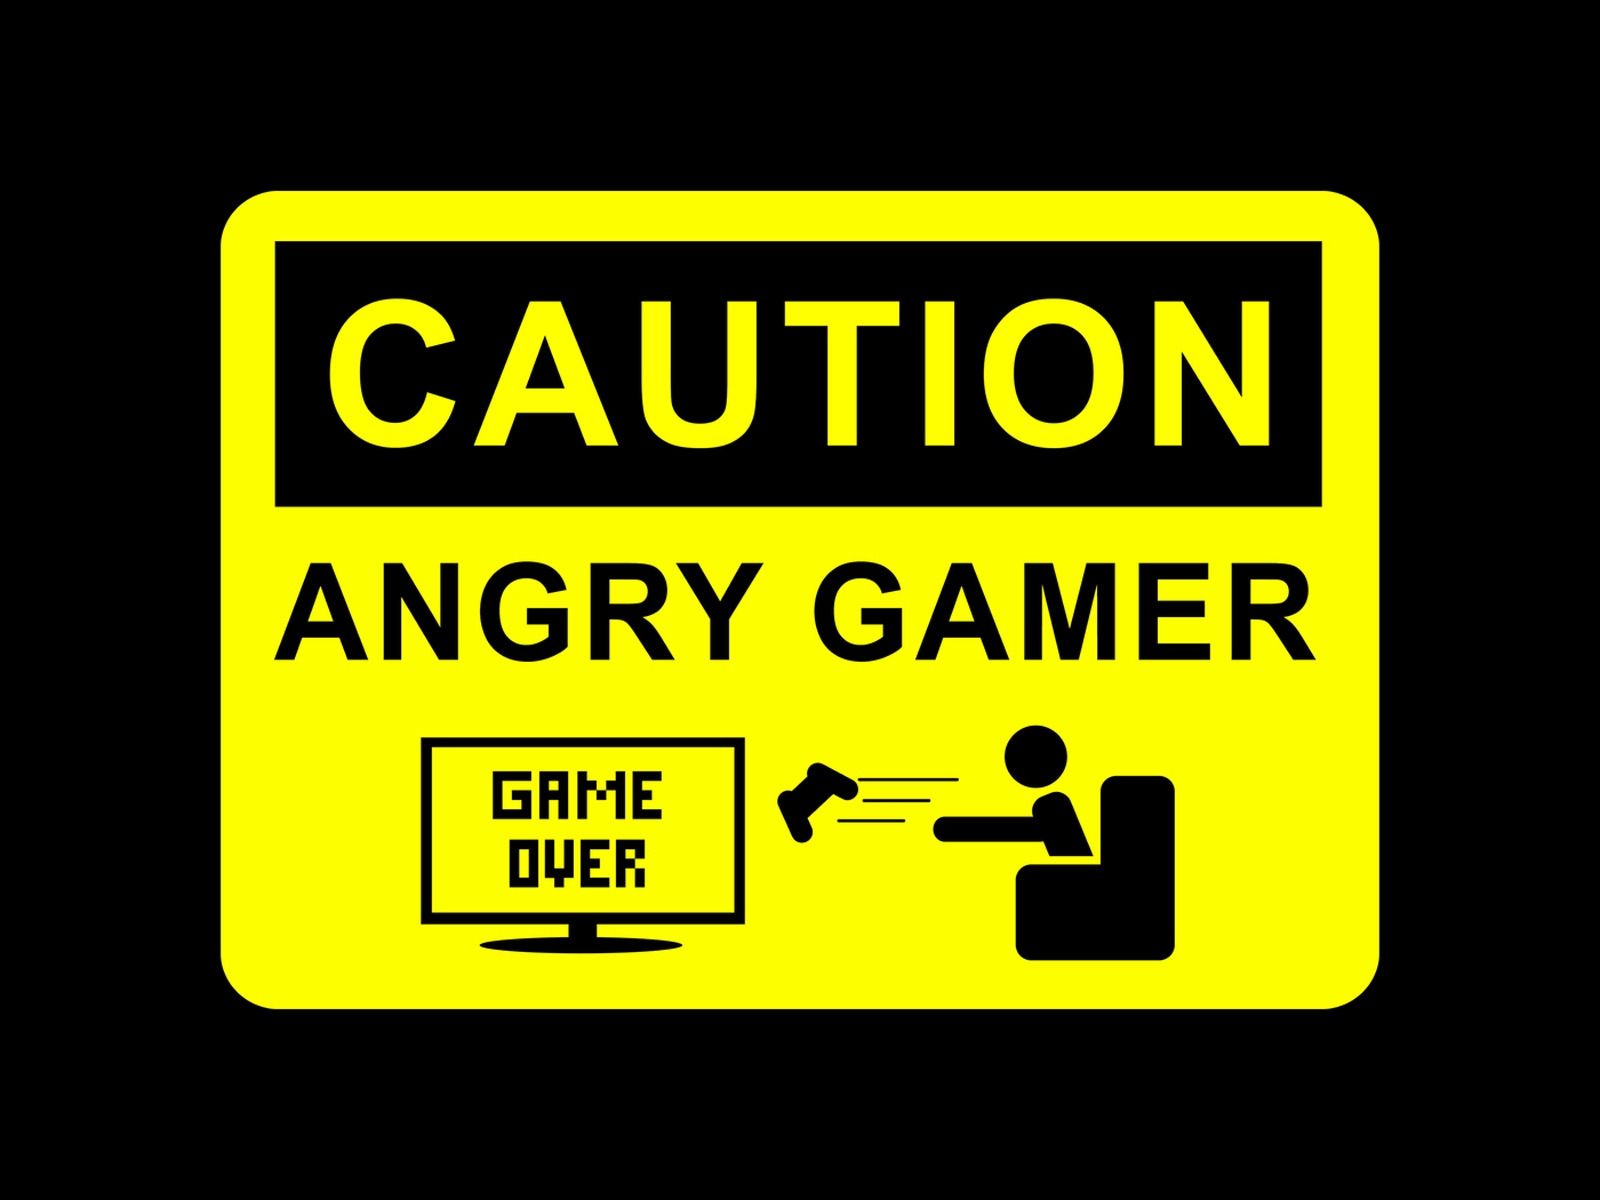 Angry Gamer for 1600 x 1200 resolution